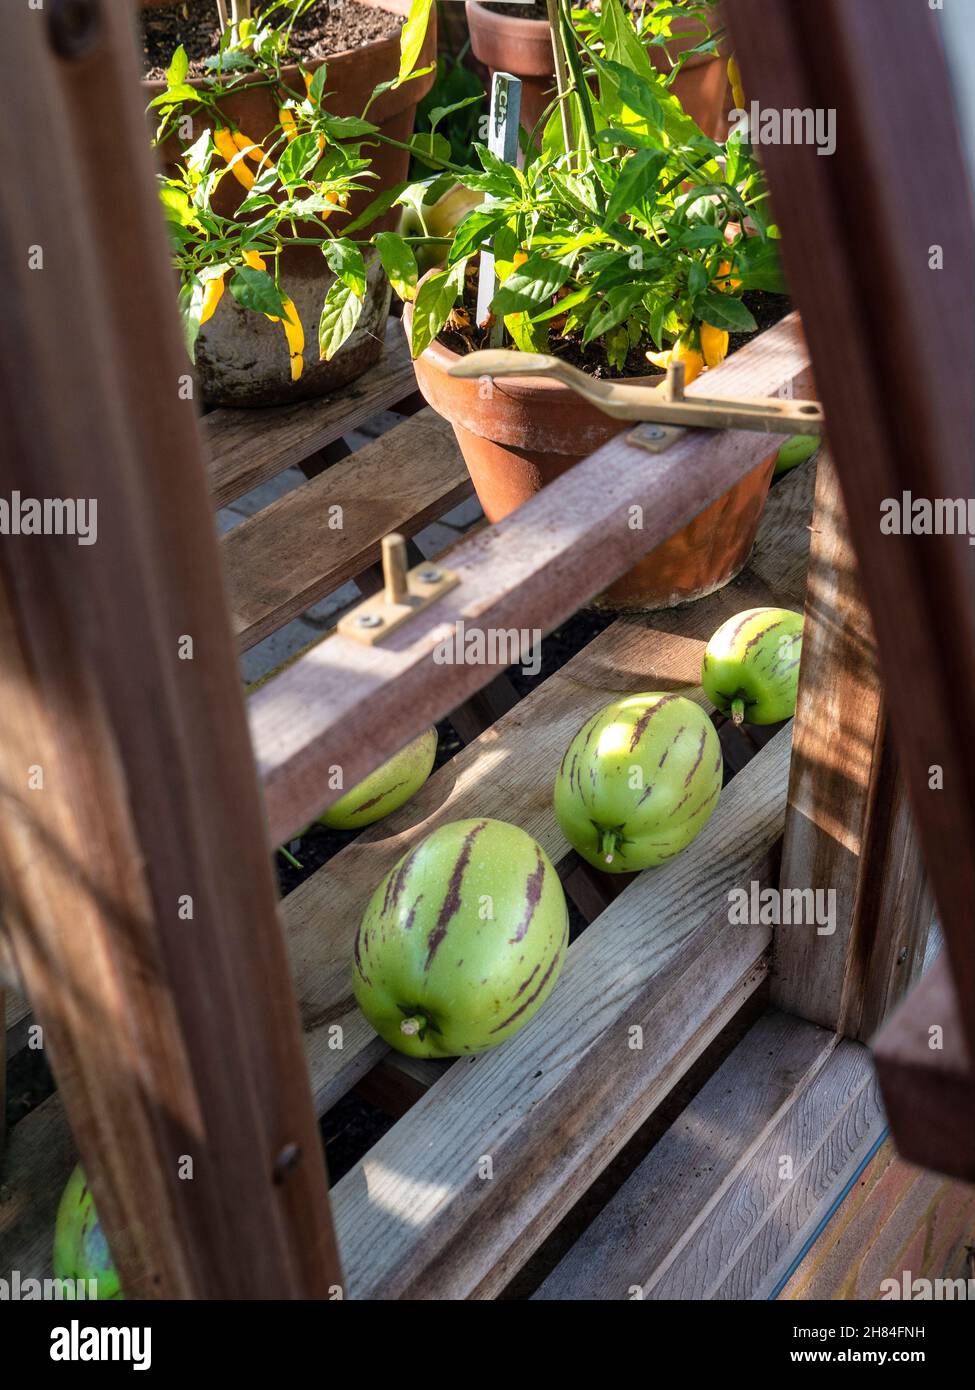 Greenhouse (traditional wooden) window open to Pepino melons 'Solanum muricatum' species of evergreen fruit native to South America maturing and air ripening with chilli peppers yellow 'CHUPETINHO' potted in sunlight behind. Autumnal horticultural scene of edible produce. Stock Photo